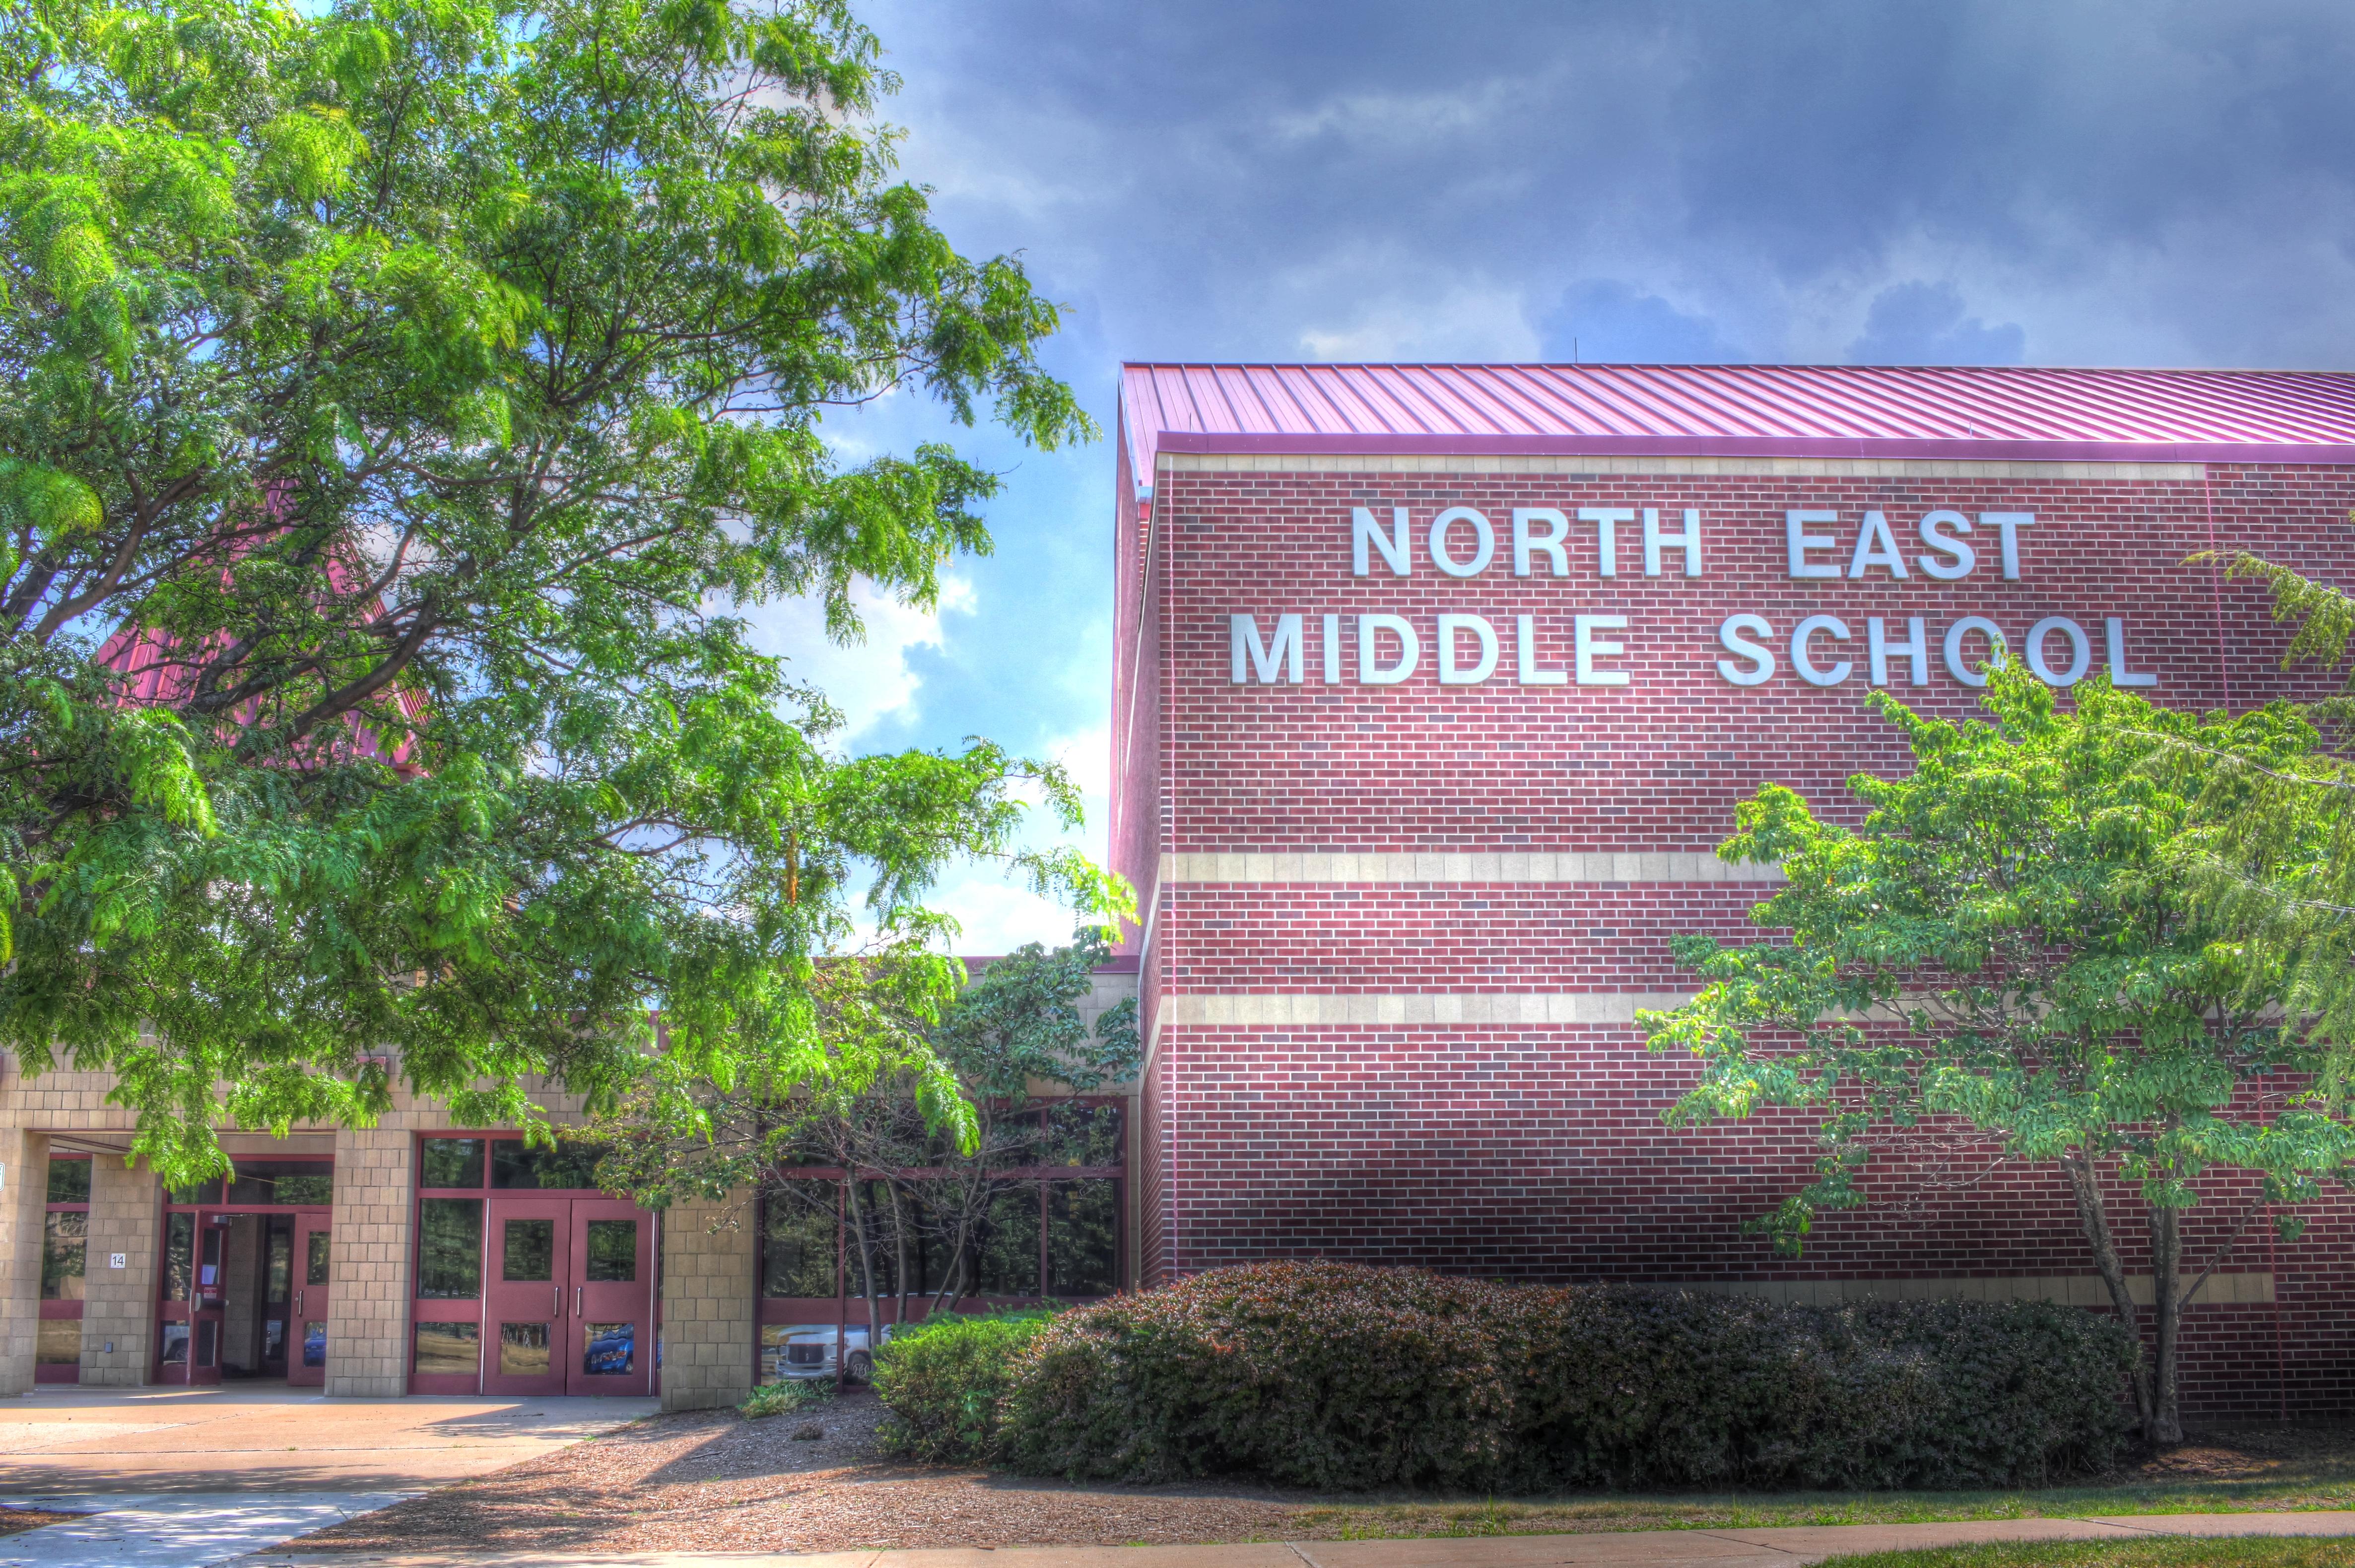 Outside view of the North East Middle School